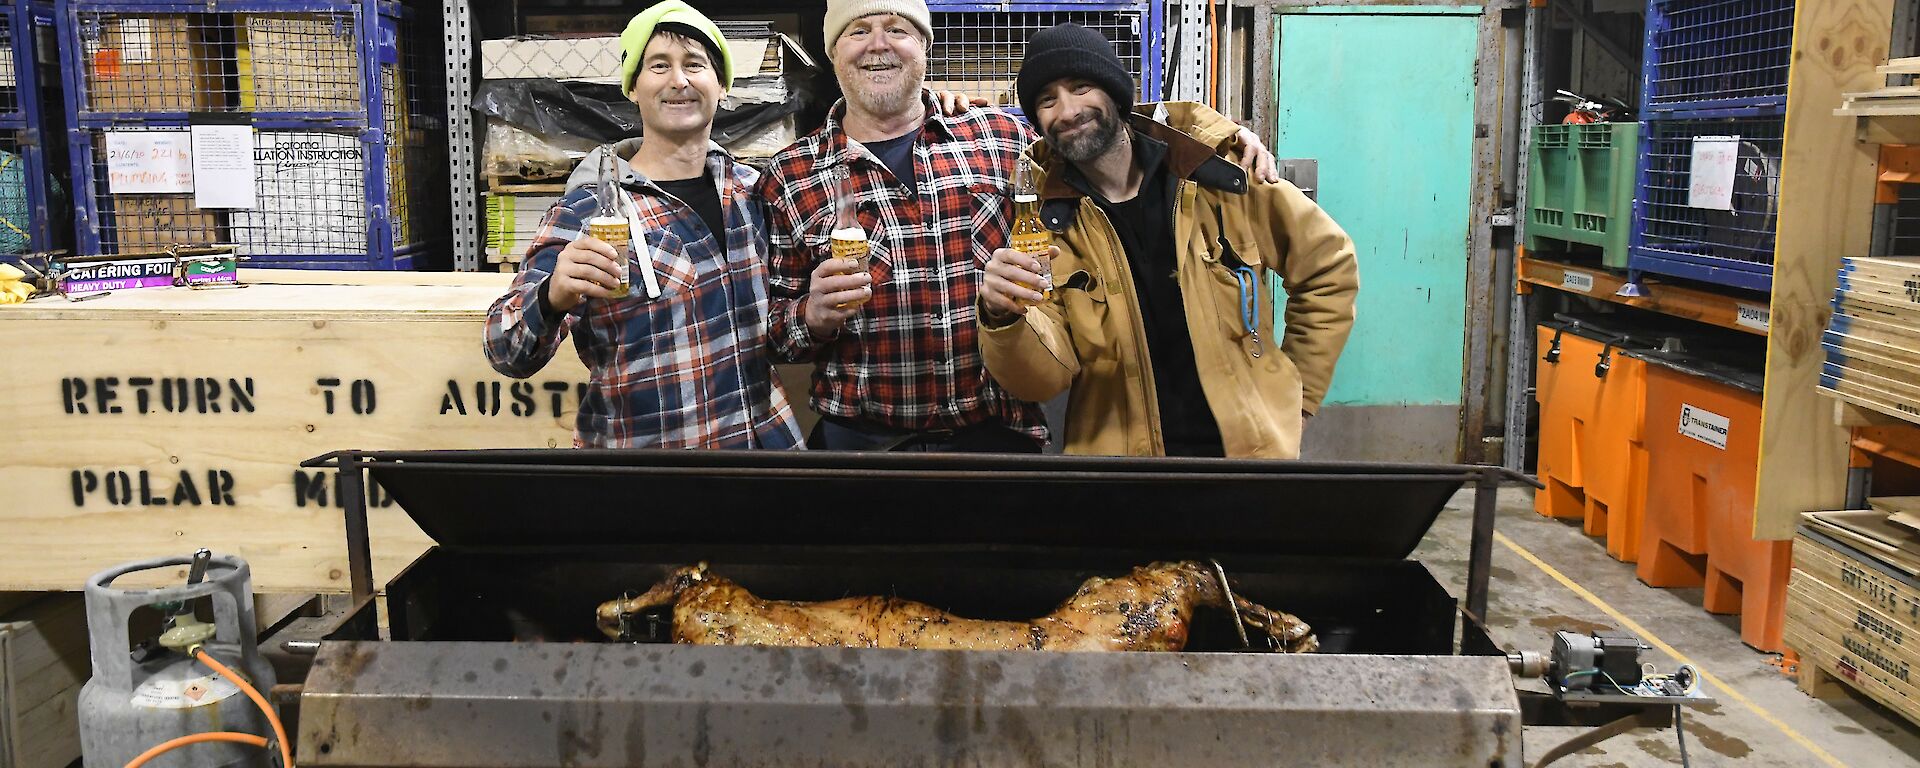 Three expeditioners standing behind the lamb spit, shoulder to shoulder with beers in hand and big grins on their faces.